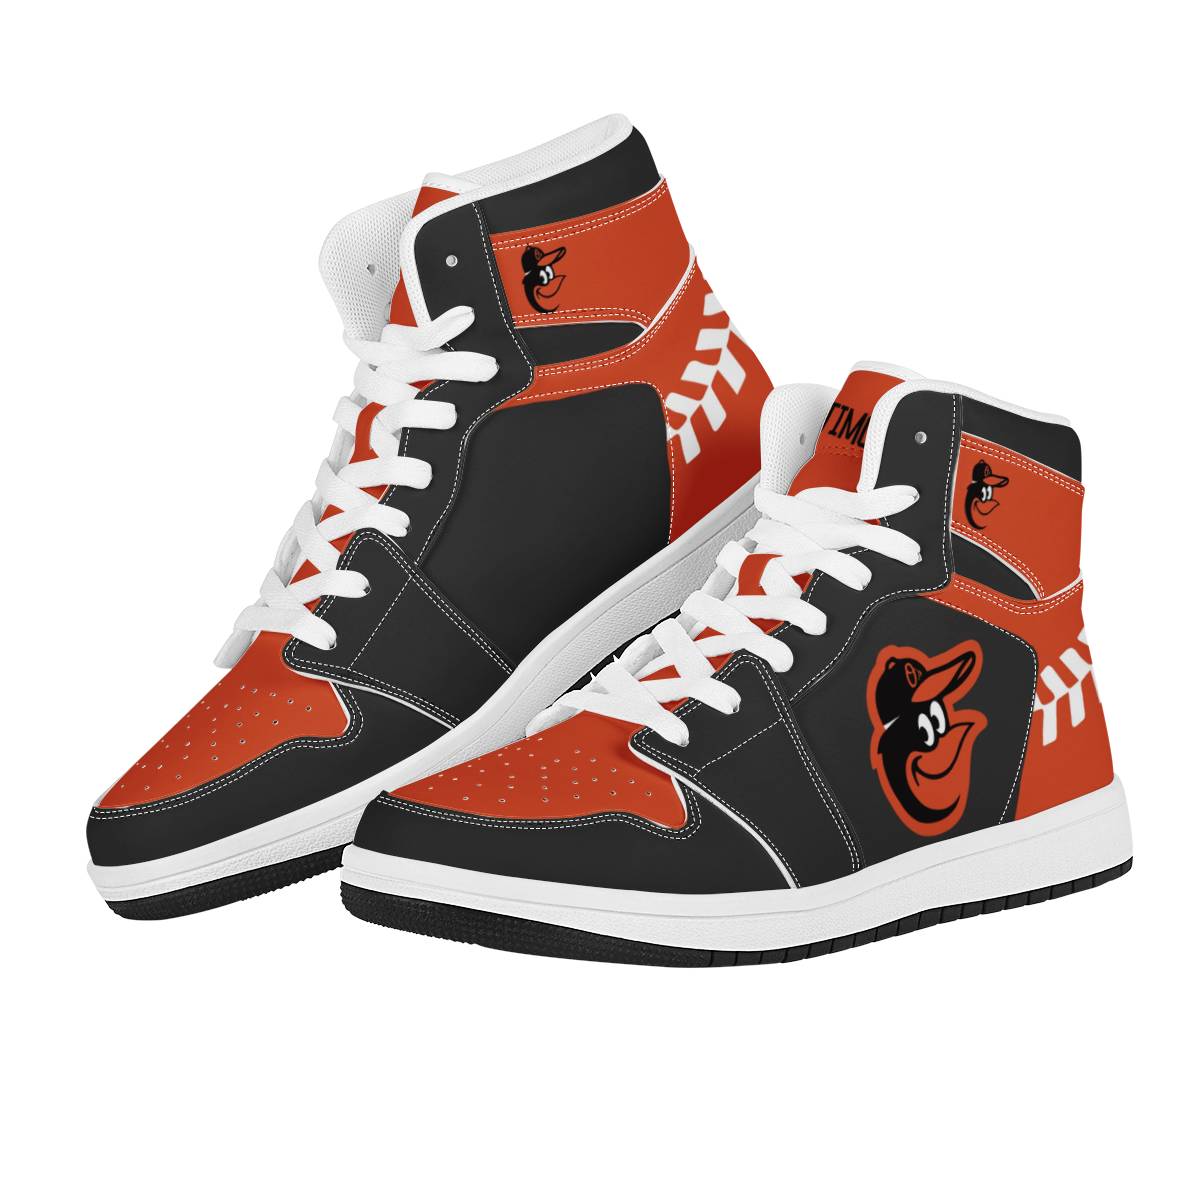 Women's Baltimore Orioles High Top Leather AJ1 Sneakers 001